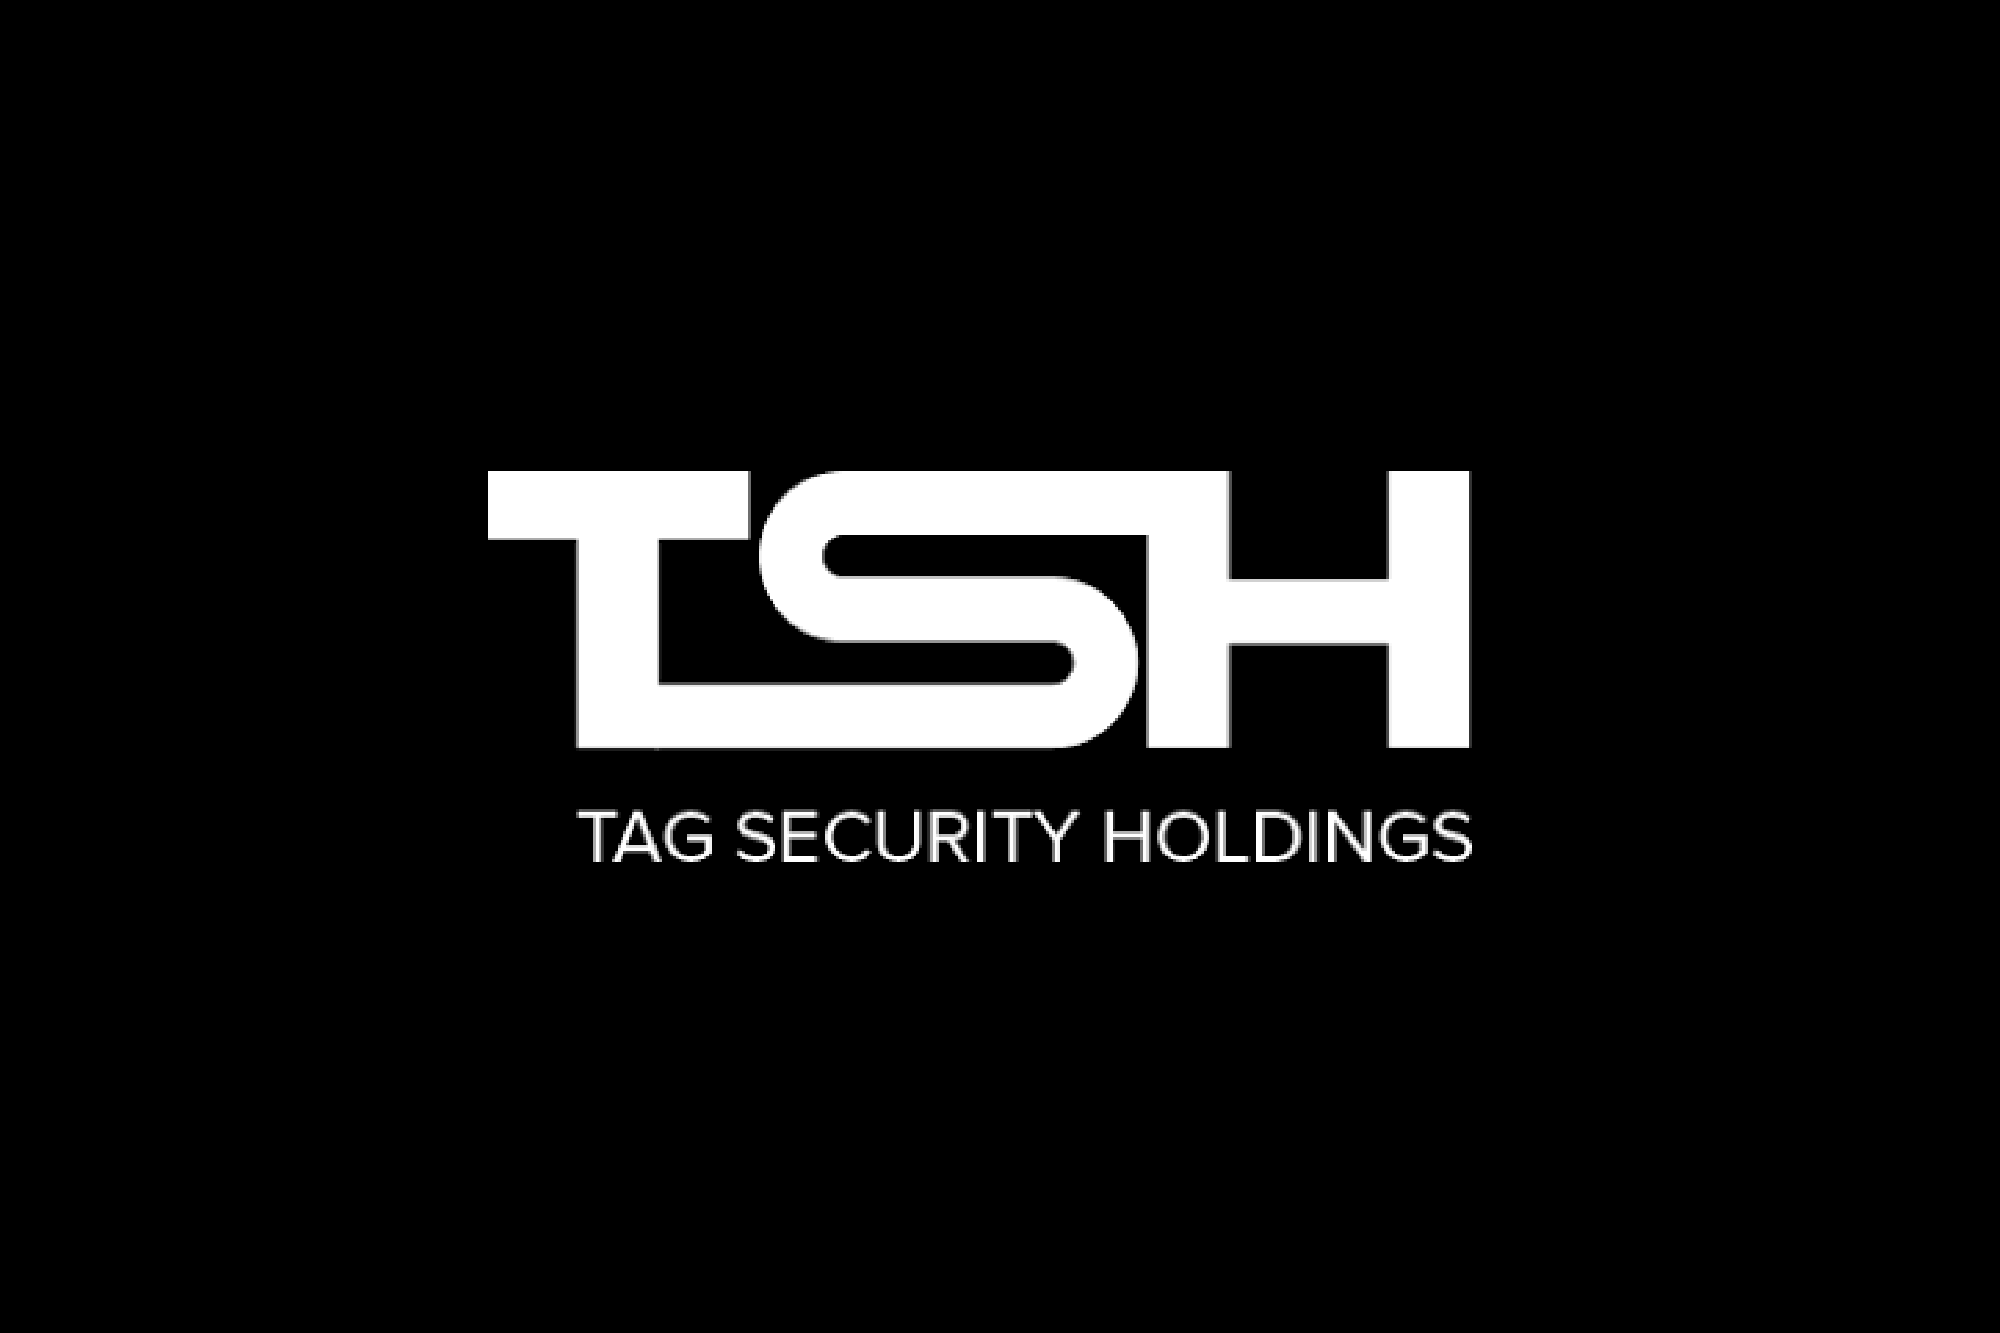 Tag security holdings deal